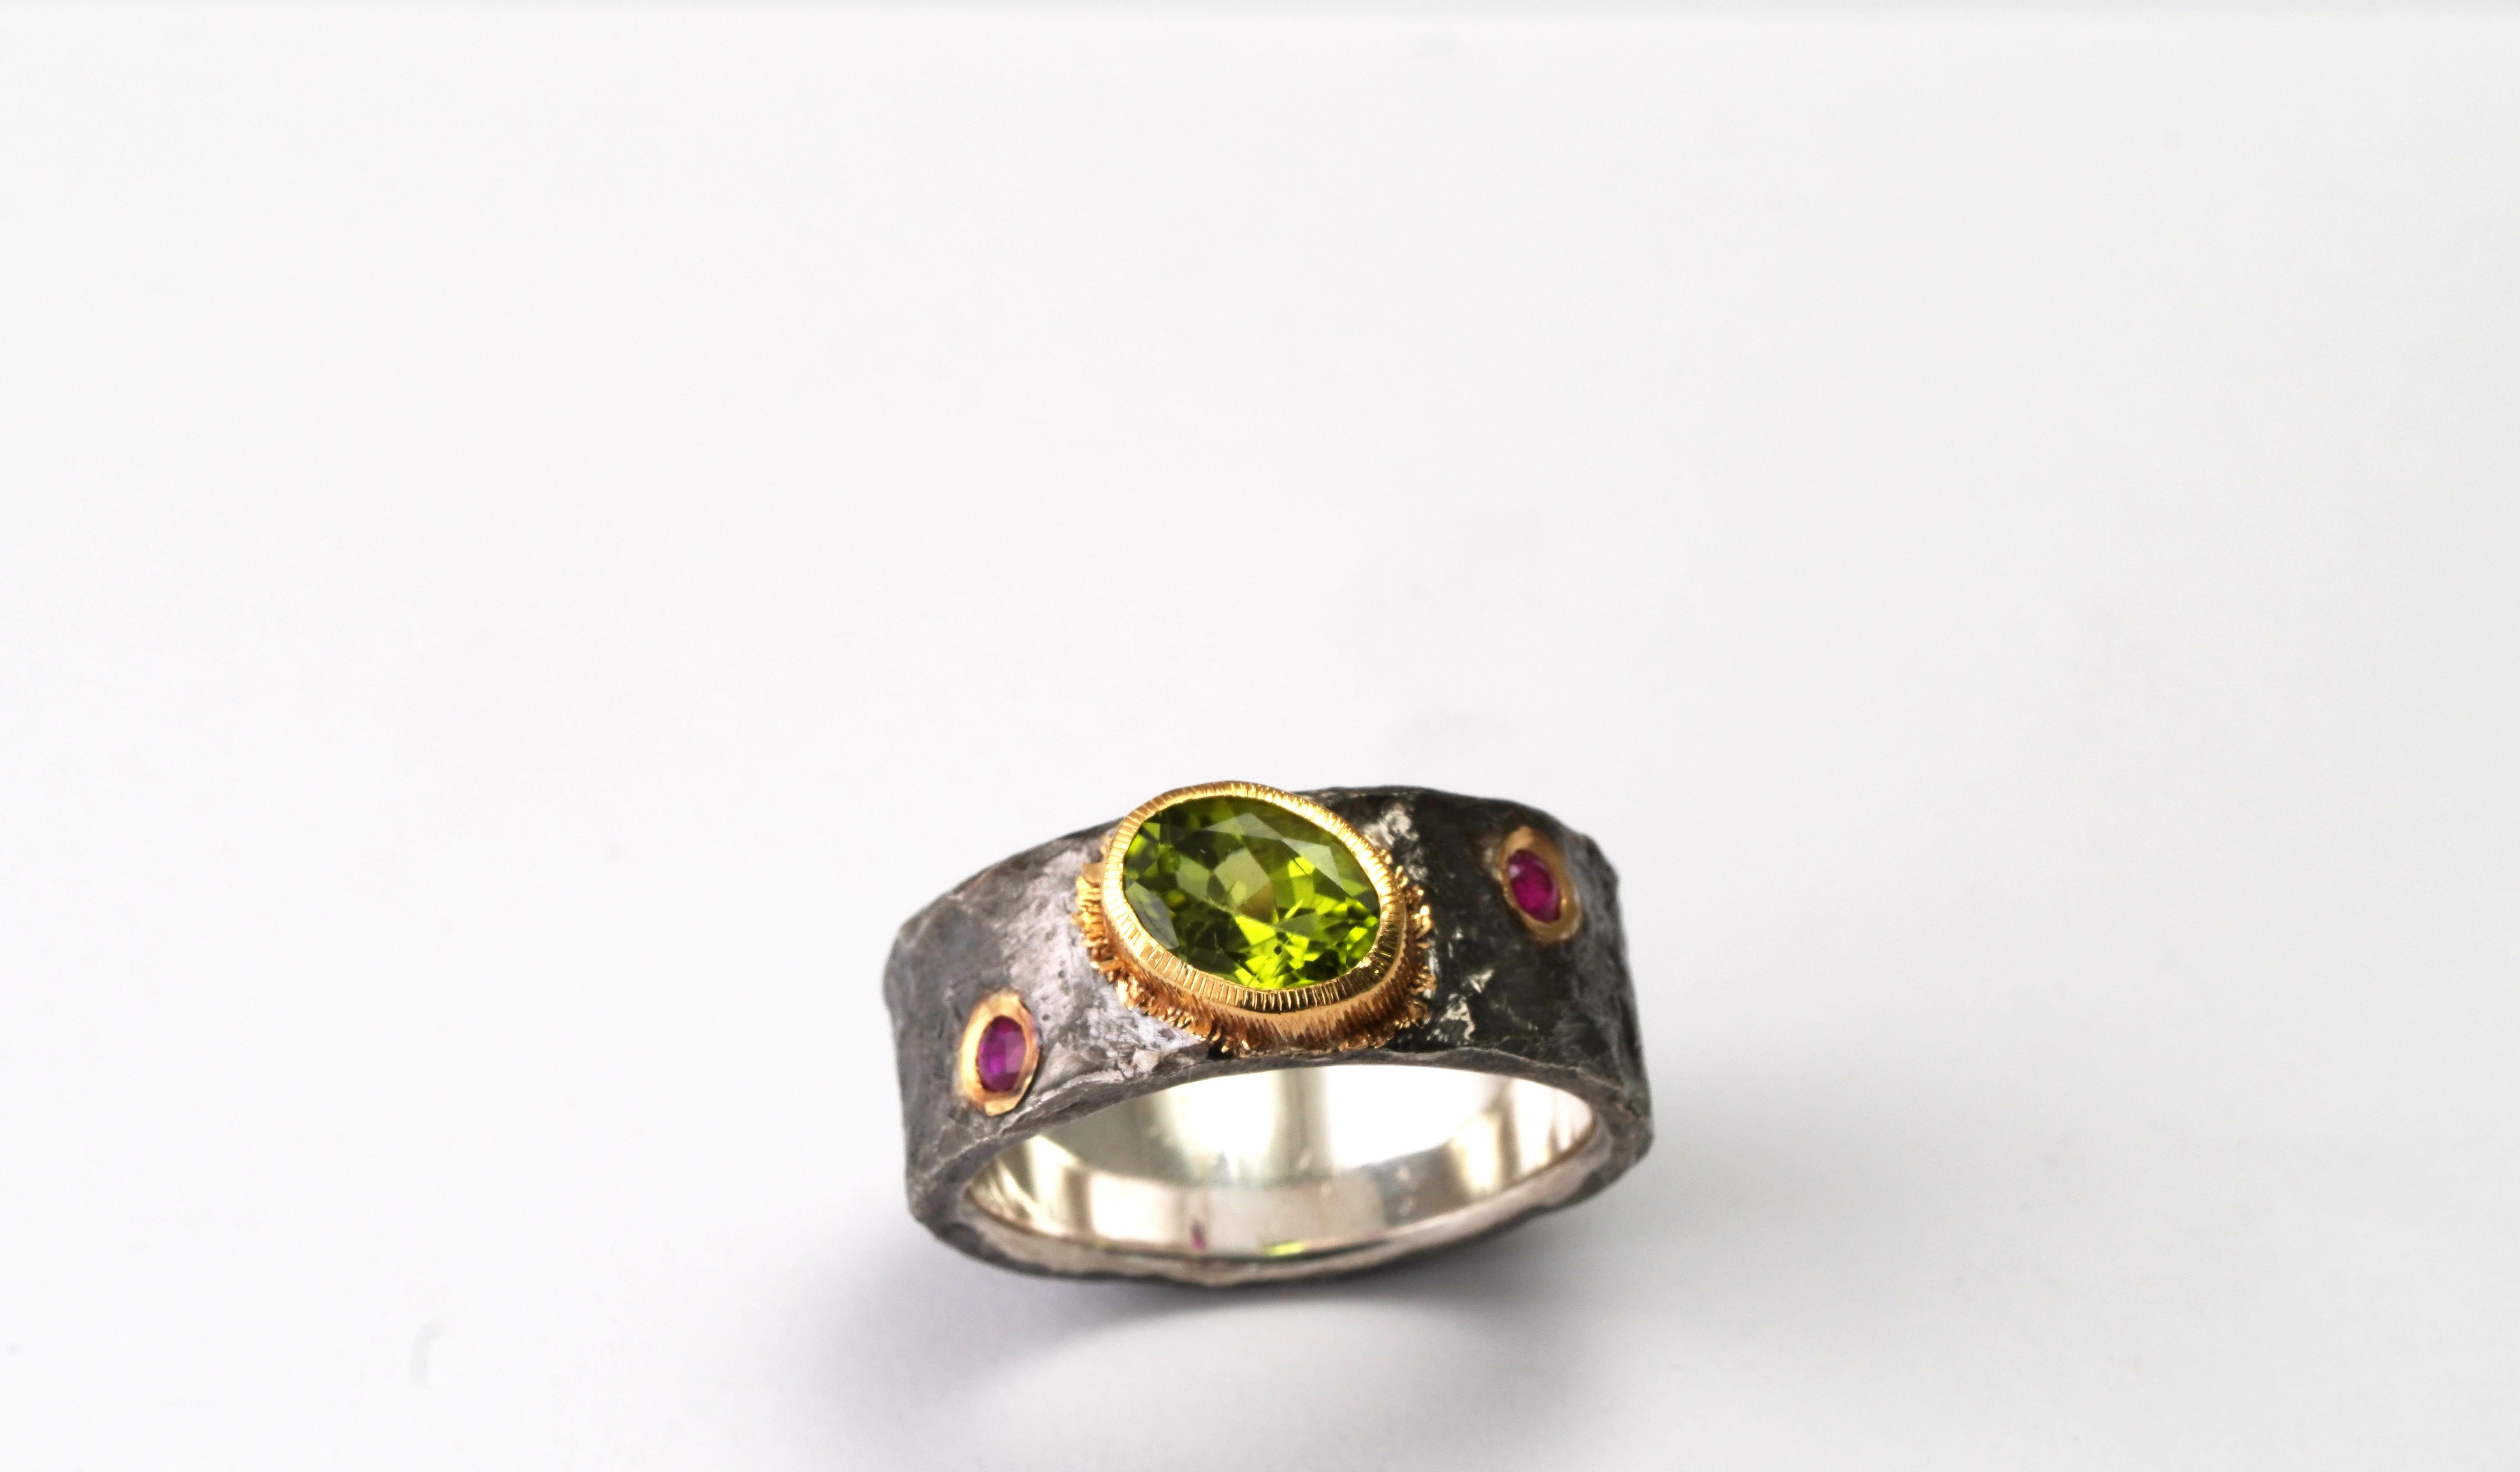 925 Oxidized Silver Ring
Gold kt: 22 
Gold color: Yellow
Ring size: 6 3/4 US
Total weight: 8.64 grams

Set with:
- Peridot
Cut: Mixed
Total weight: 1.45 carat
Color: Green
- Ruby
Cut: Mixed
Total weight: 0.10 carat
Color: Red
